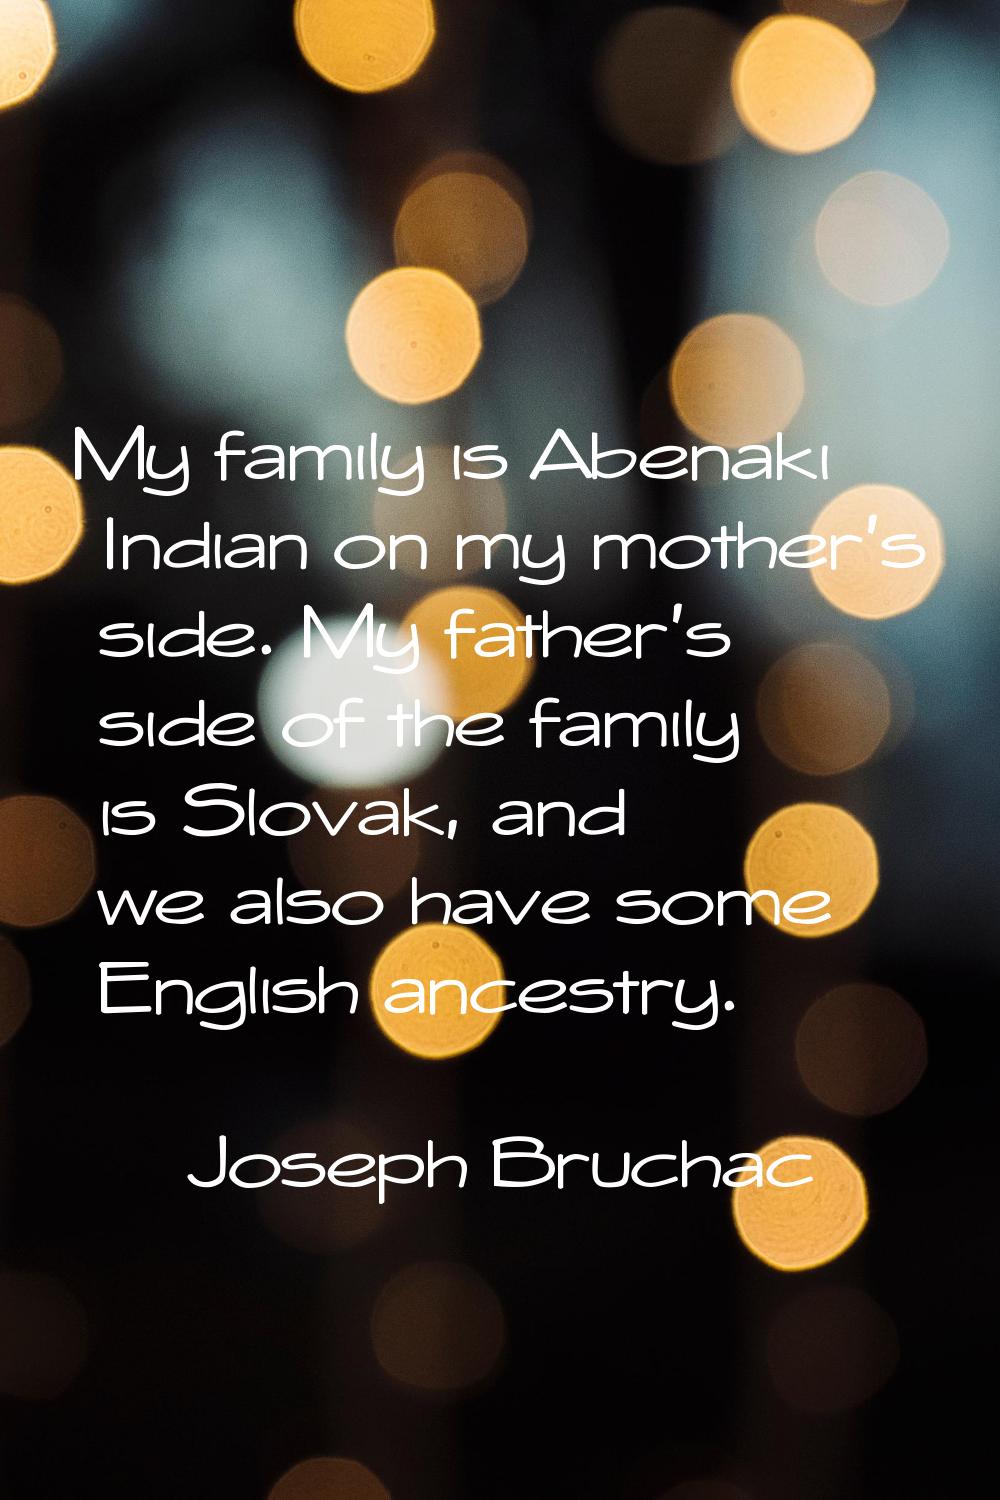 My family is Abenaki Indian on my mother's side. My father's side of the family is Slovak, and we a